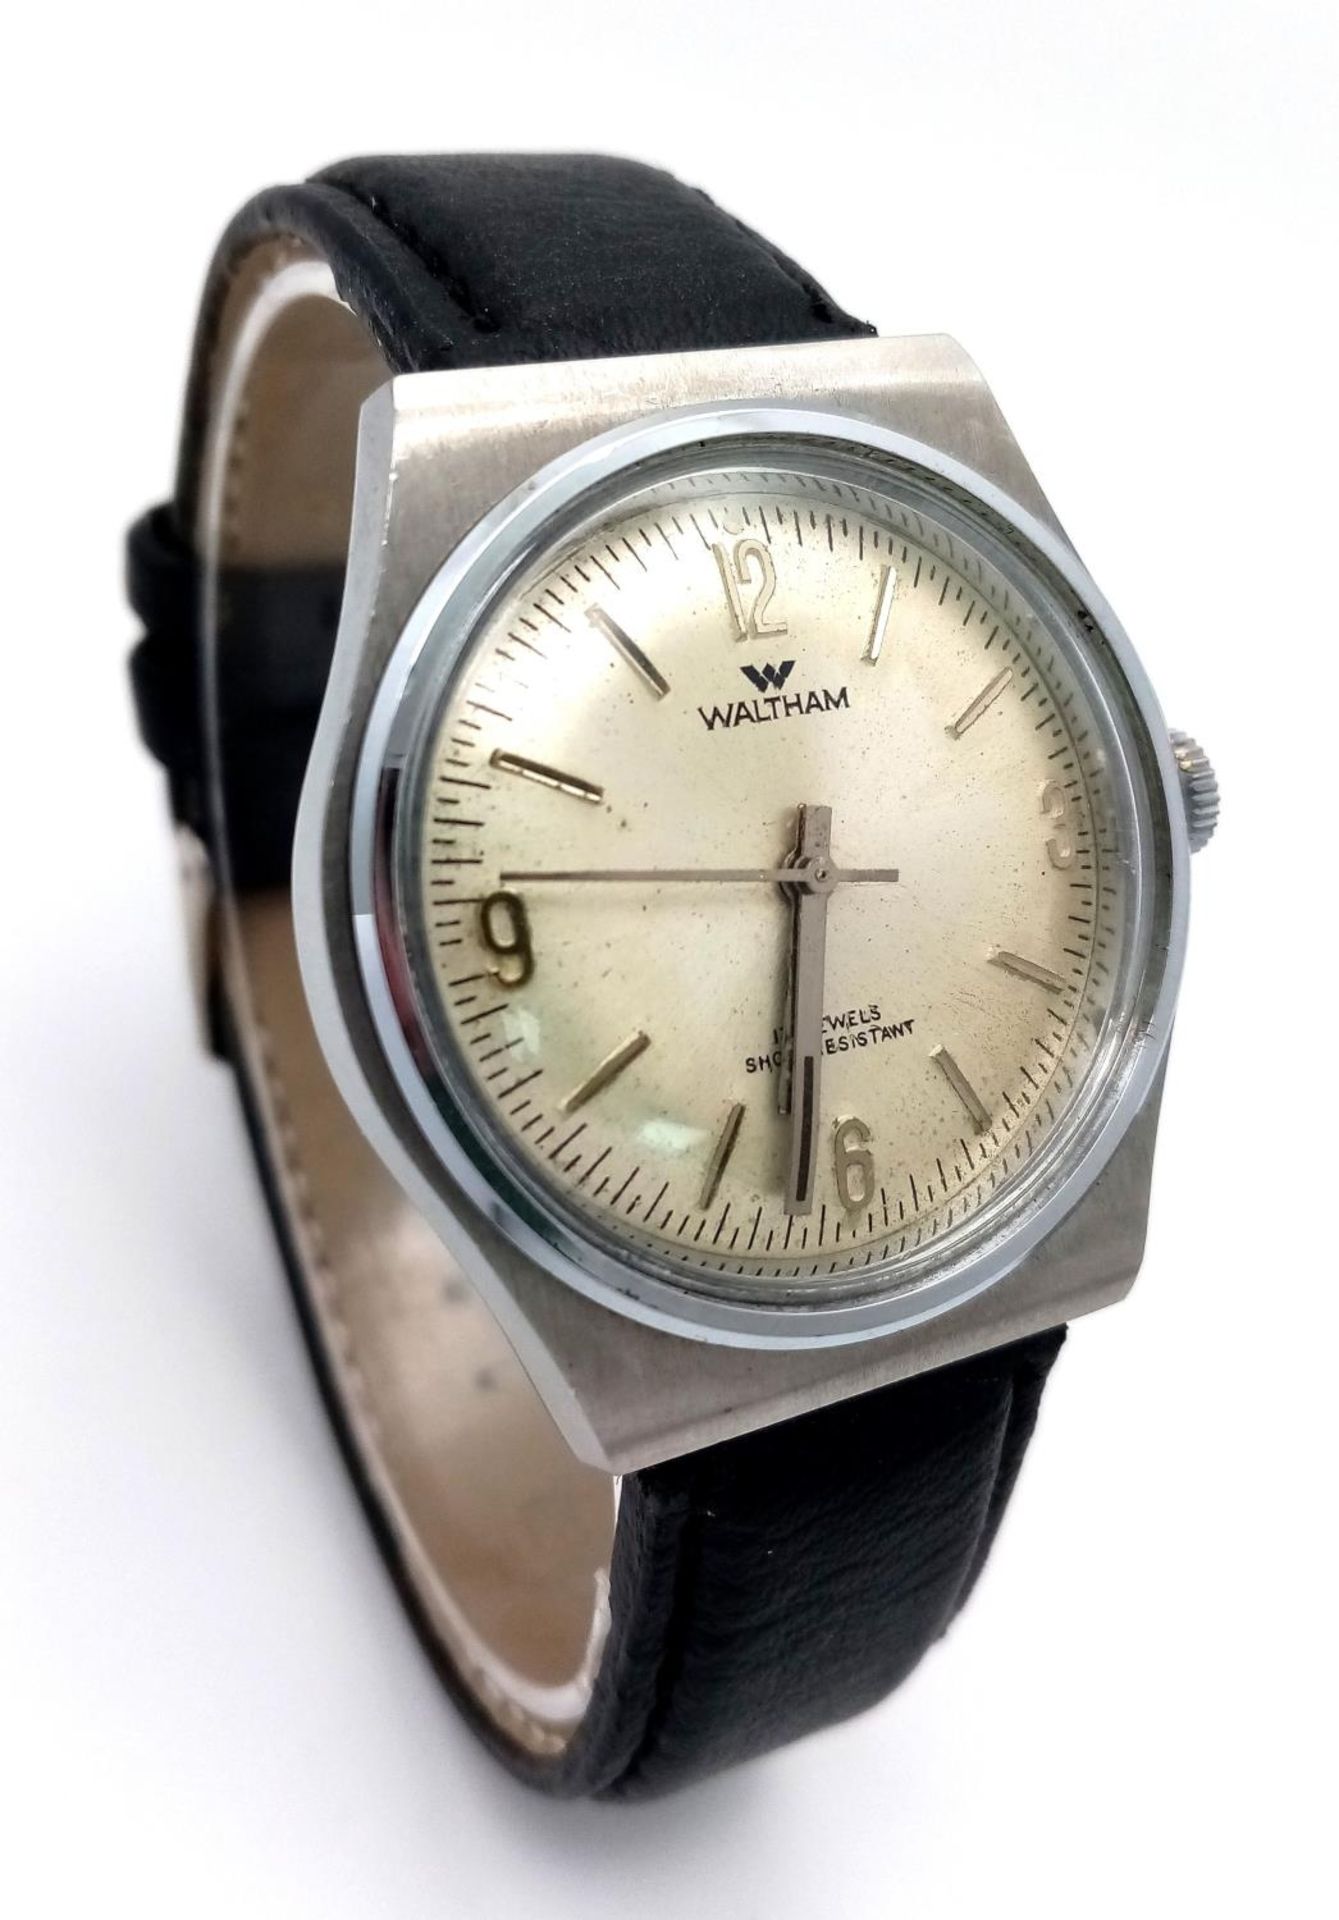 A Vintage Waltham 17 Jewel Automatic Gents Watch. Black leather strap. Stainless steel case - - Image 3 of 6